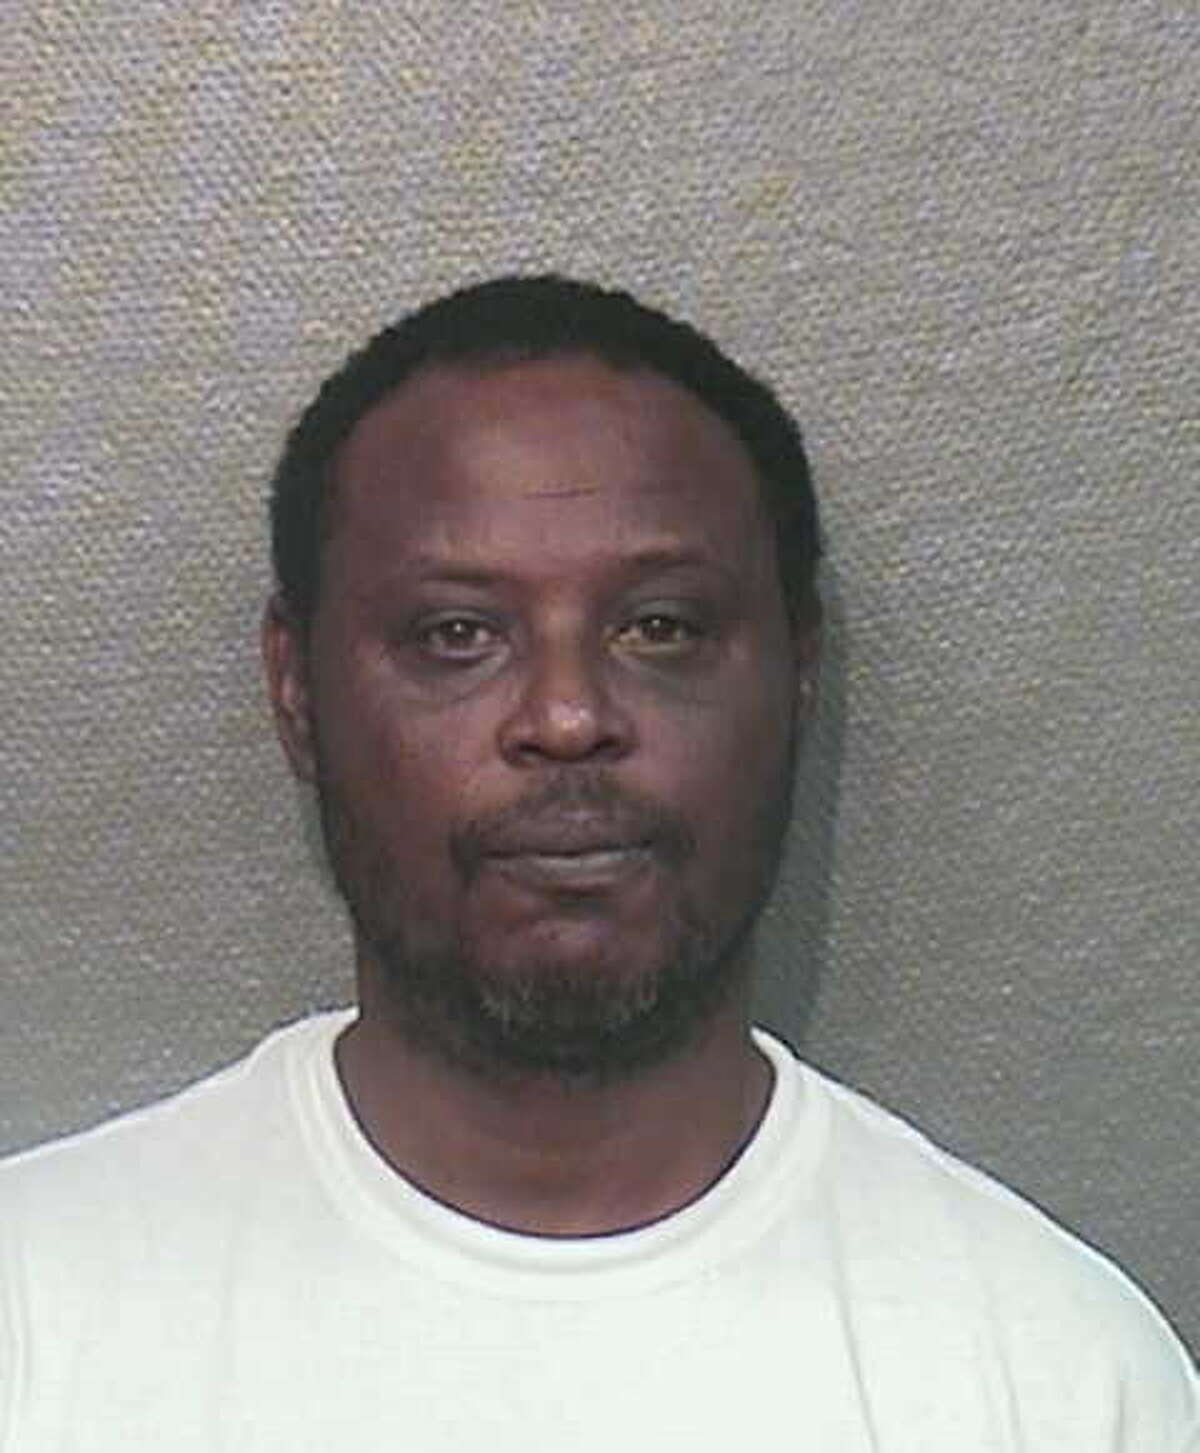 Brent Wayne Justice, 51 (DOB: 7-7-61), of Houston, is charged with felony cruelty to non-livestock animals.